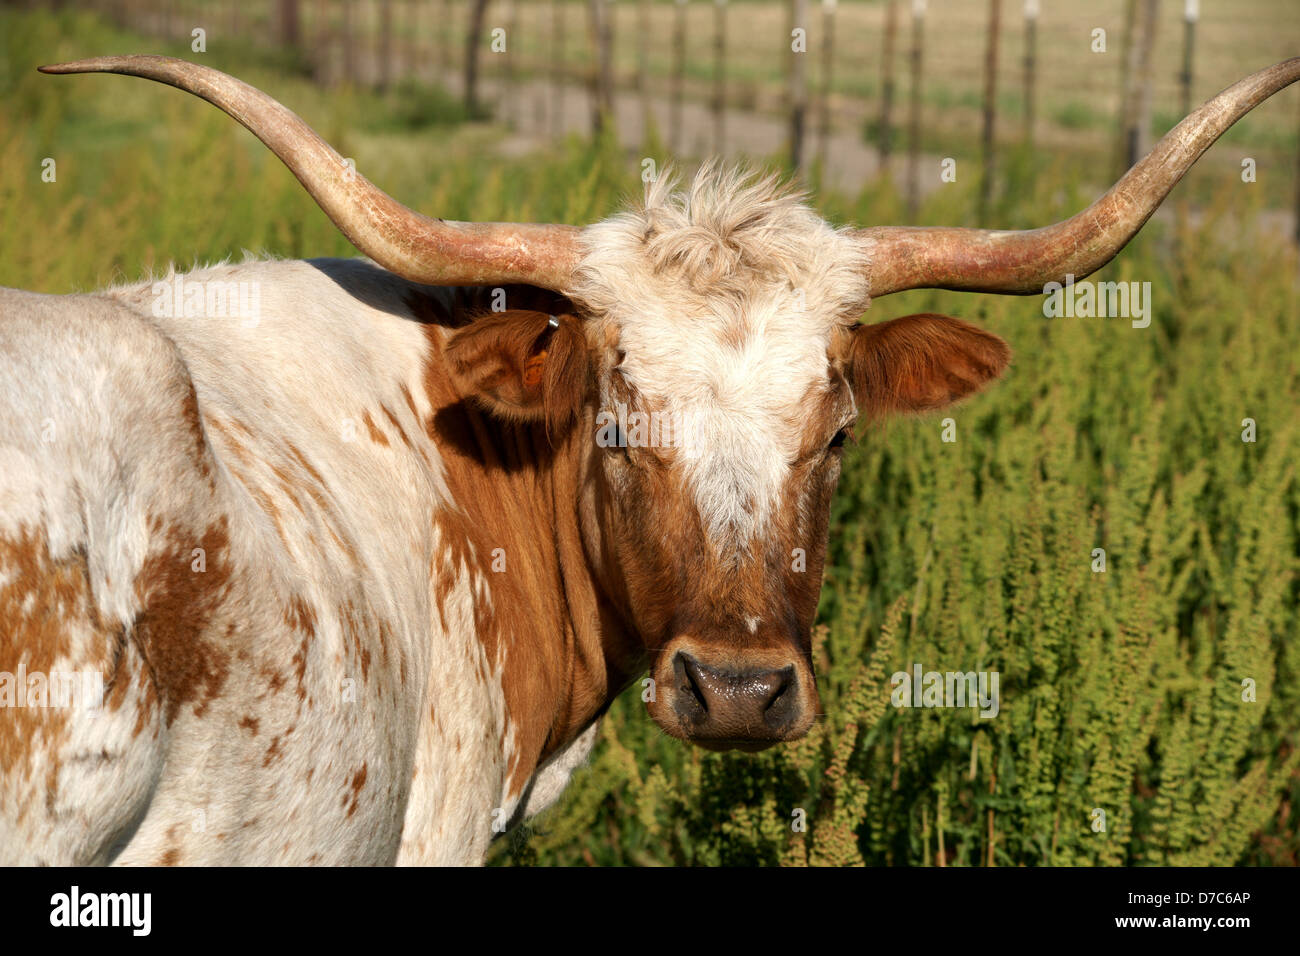 Head shot of Texas longhorn cow. Brown and white coat. Facing the camera Stock Photo